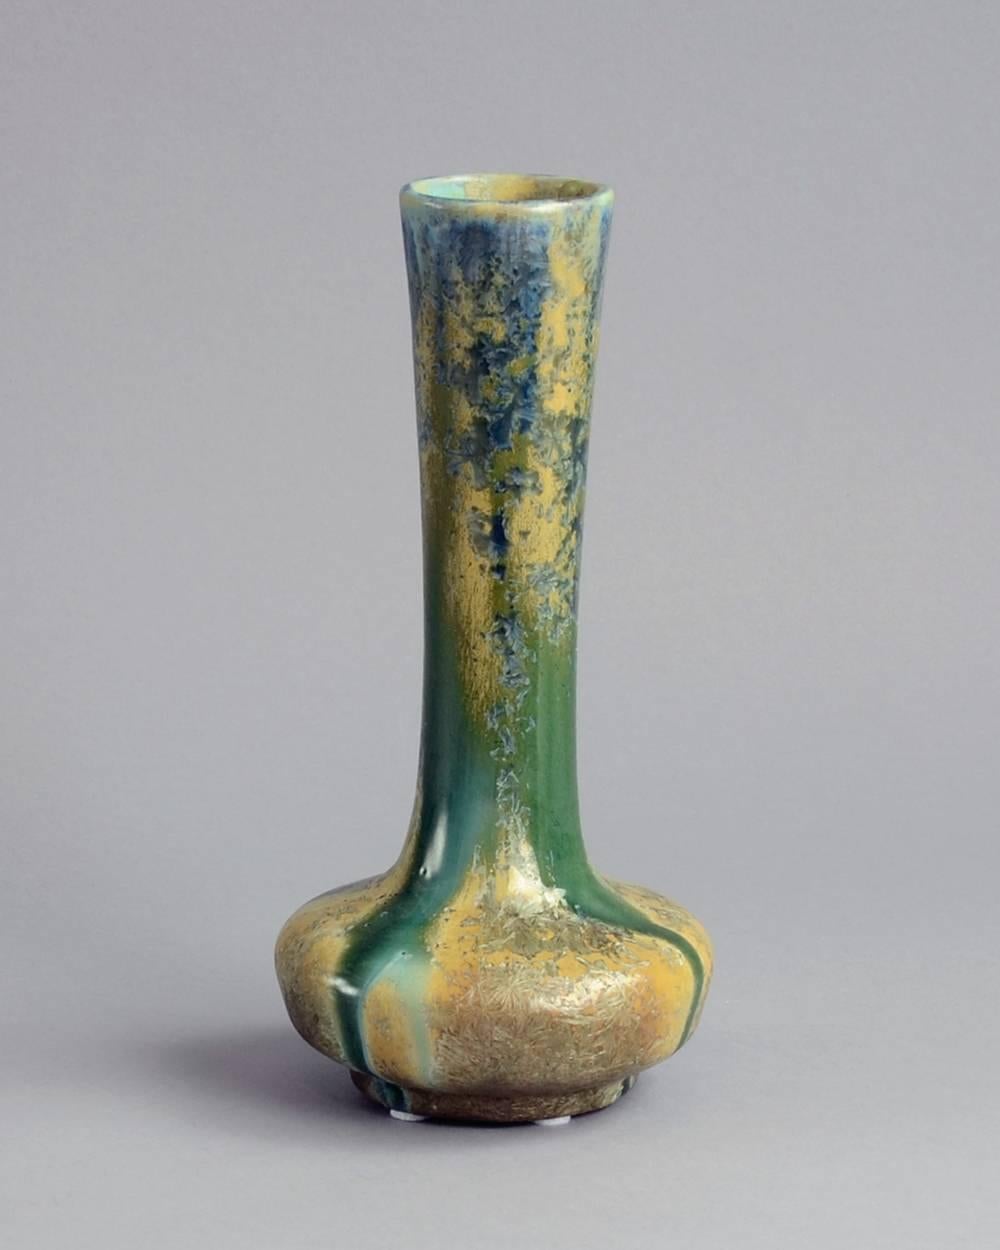 French Art Nouveau Stoneware Vase with Dripping Glaze by Pierrefonds, France For Sale